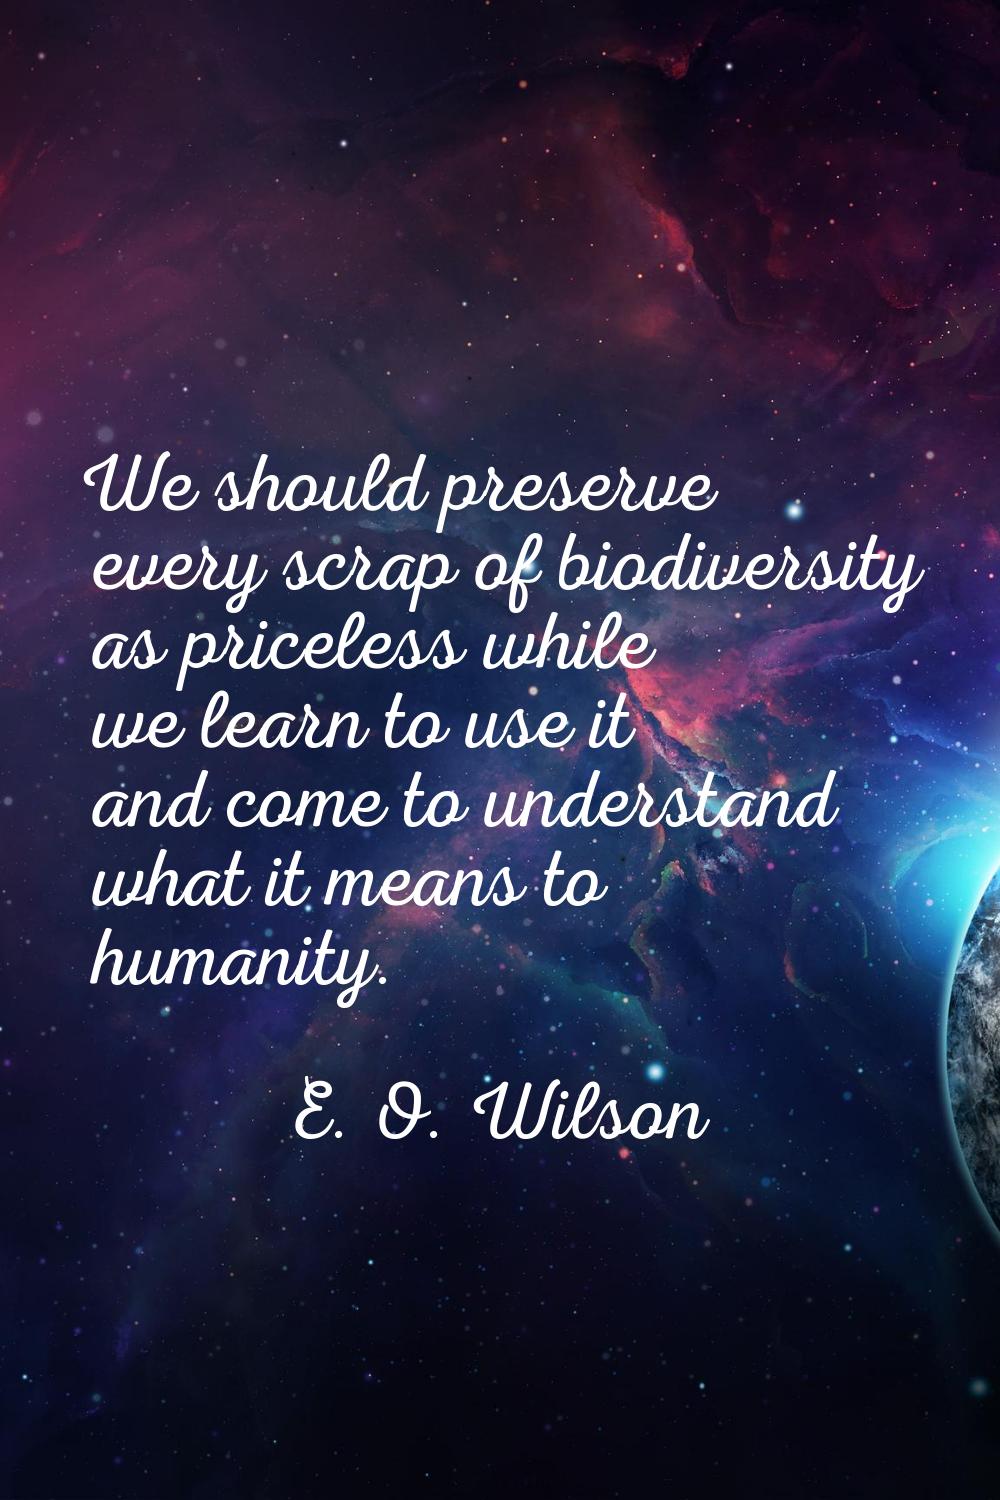 We should preserve every scrap of biodiversity as priceless while we learn to use it and come to un